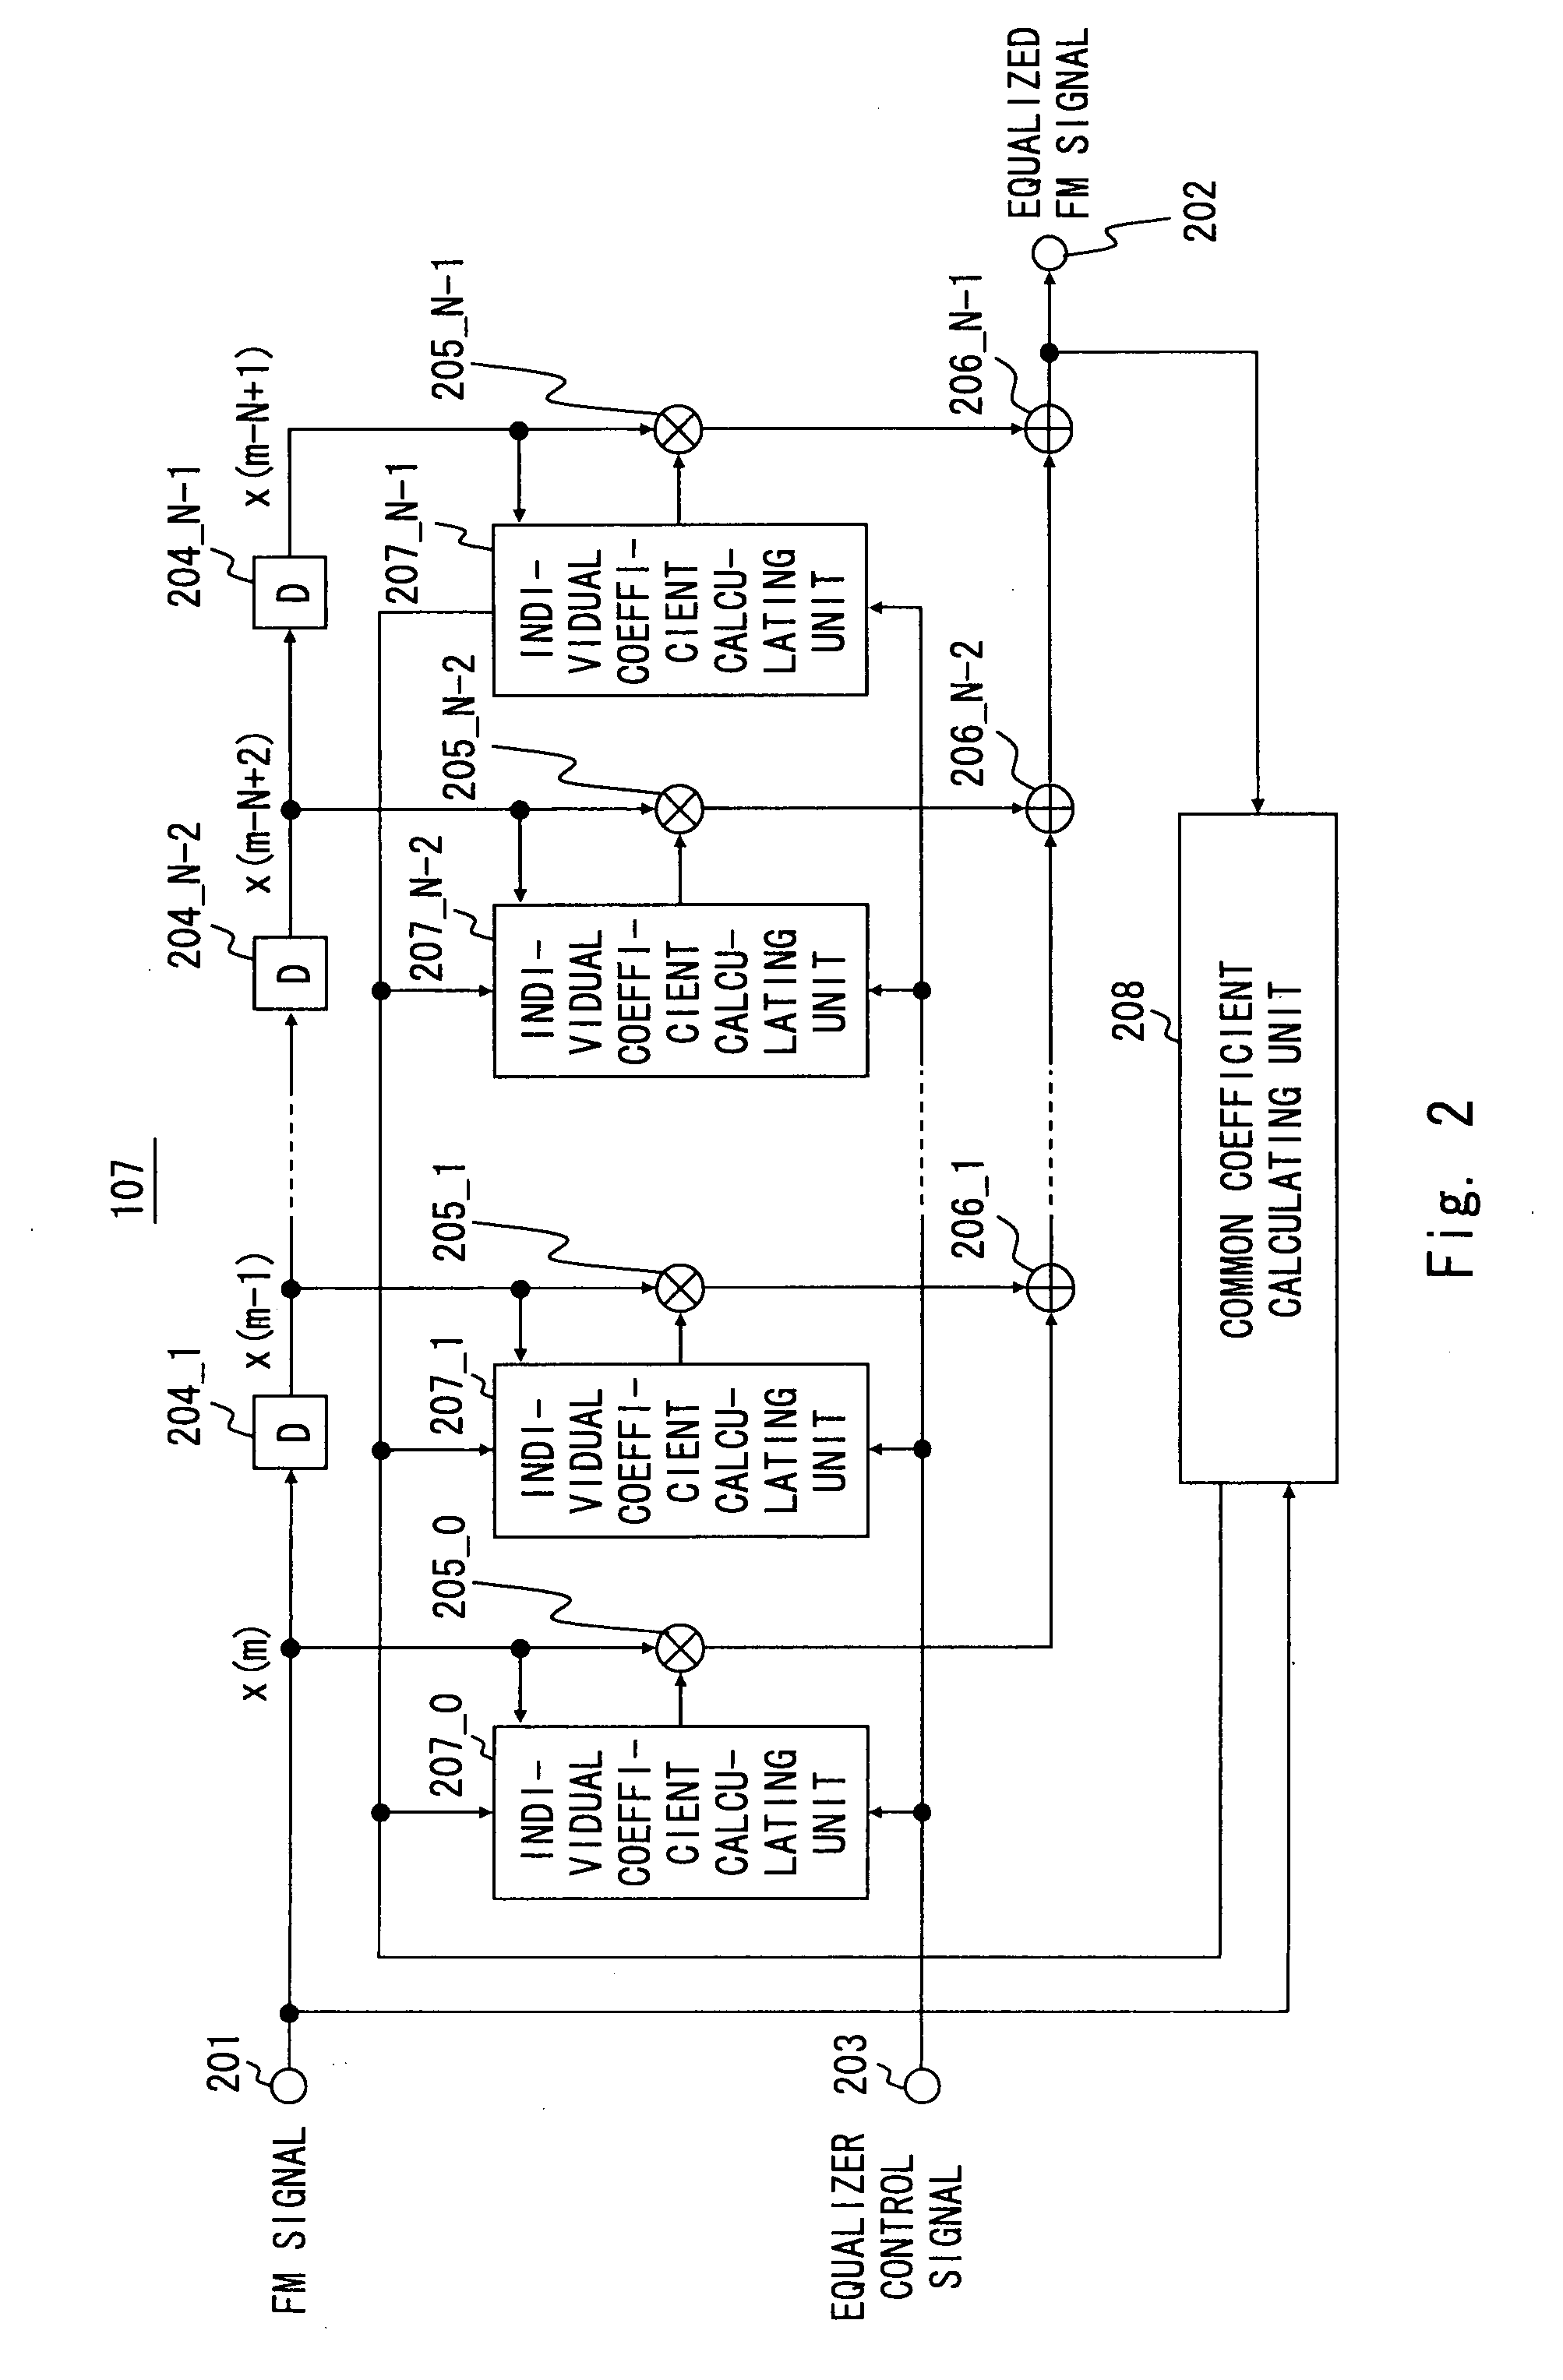 Adaptive equalizer with function of stopping adaptive equalization processing and receiver